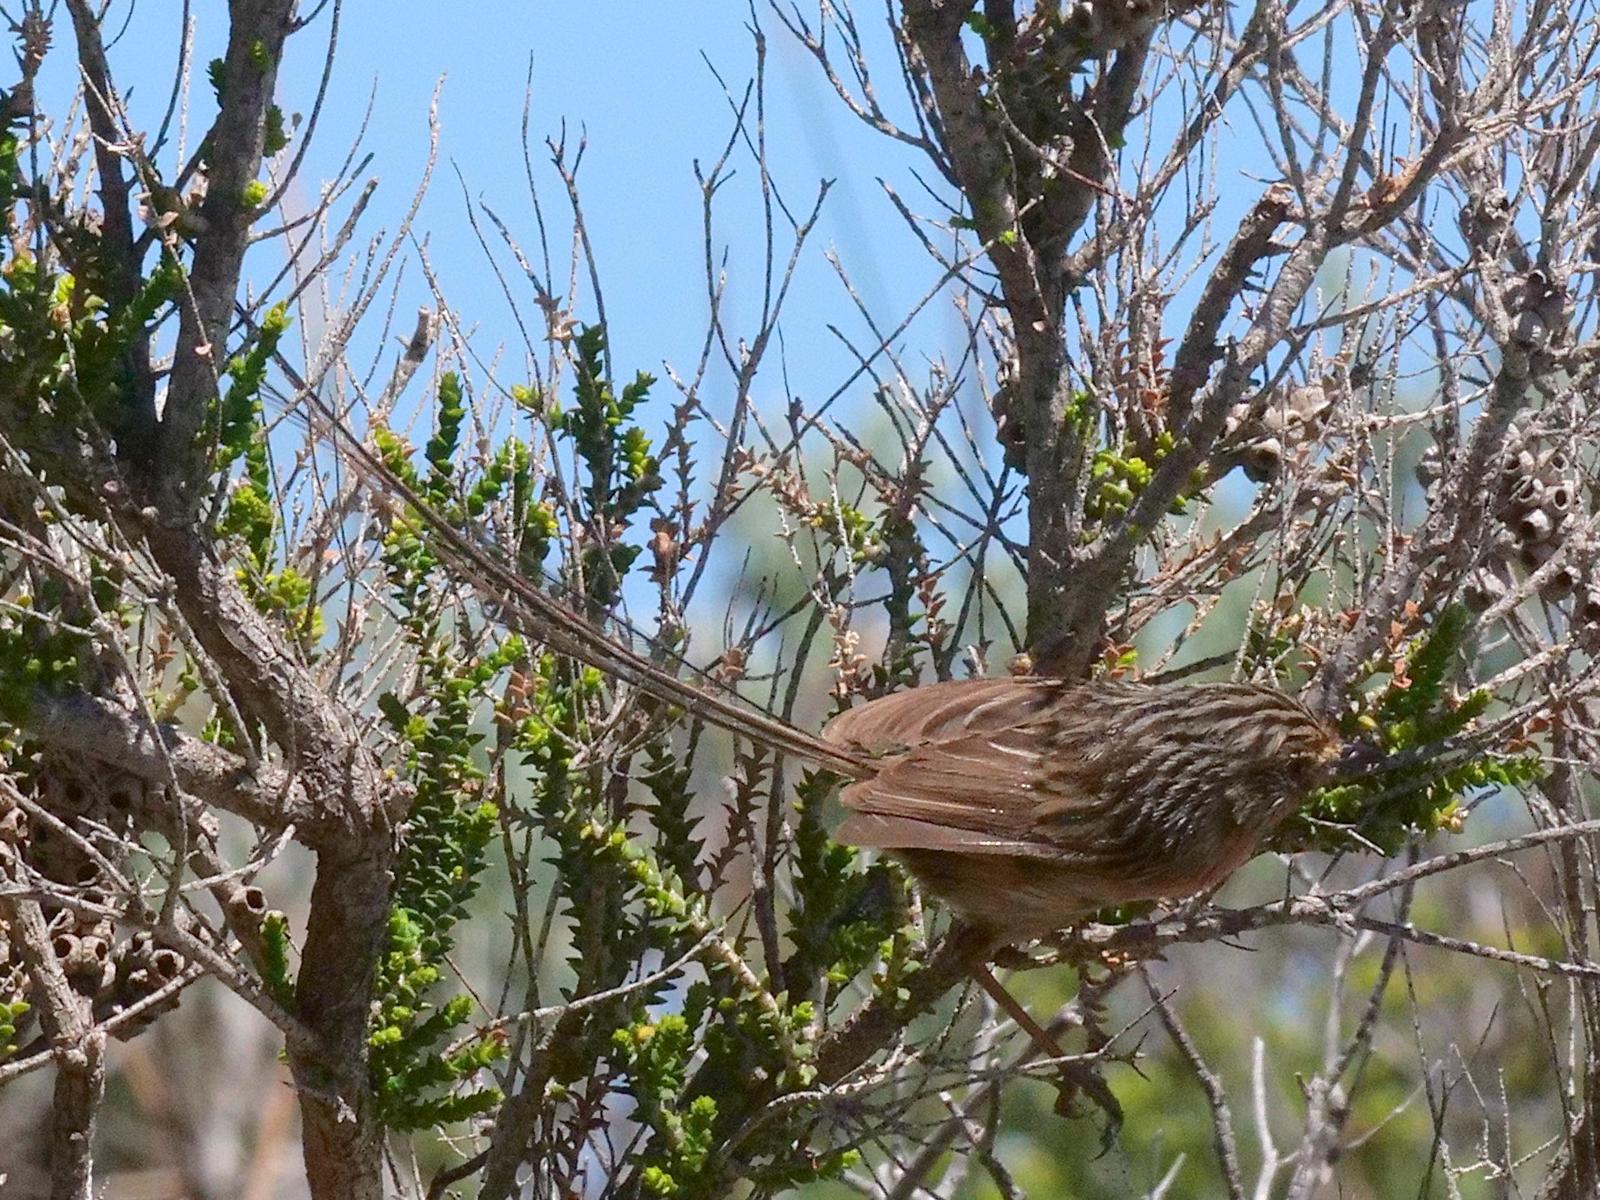 Southern Emuwren Photo by Peter Lowe